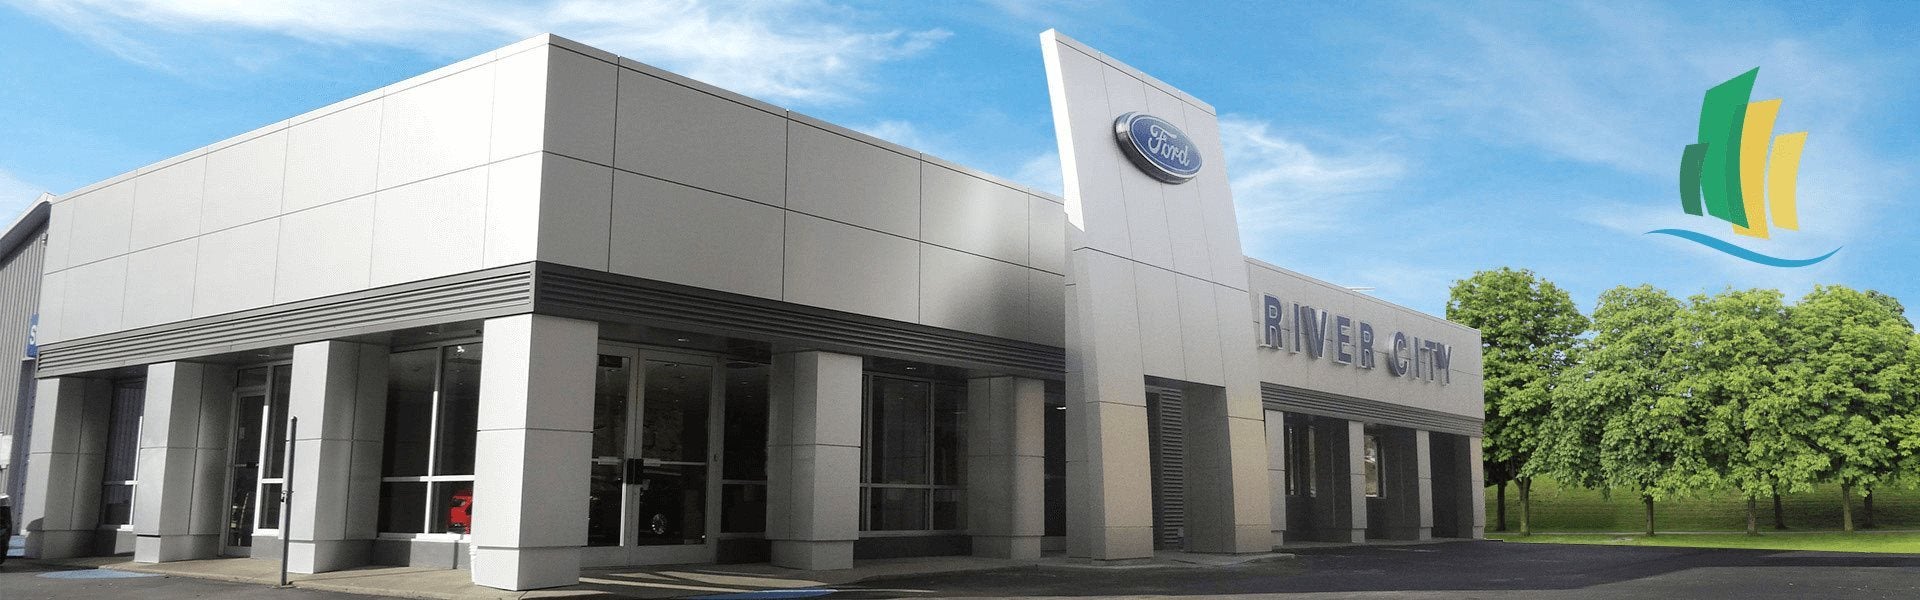 River City Ford in Lavalette, WV